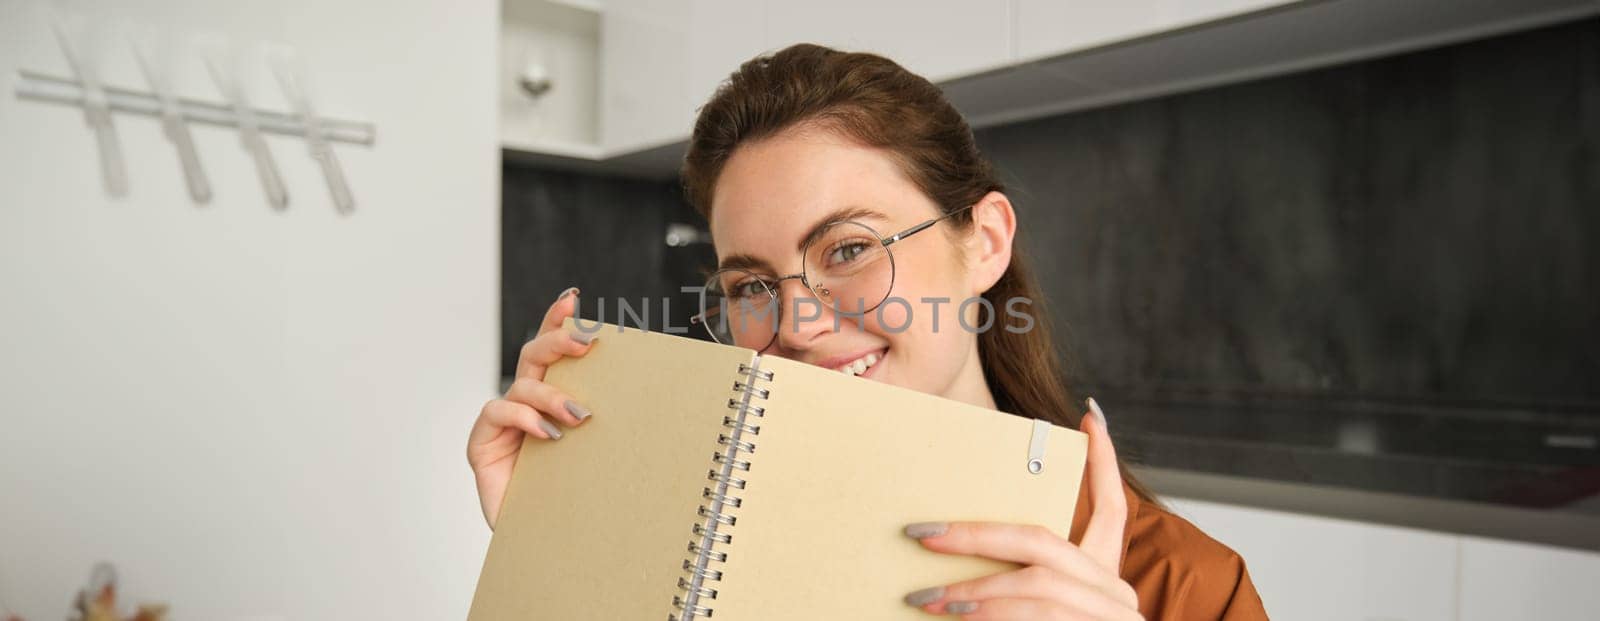 Close up portrait of young woman smiling, holding notebook, showing her planner.